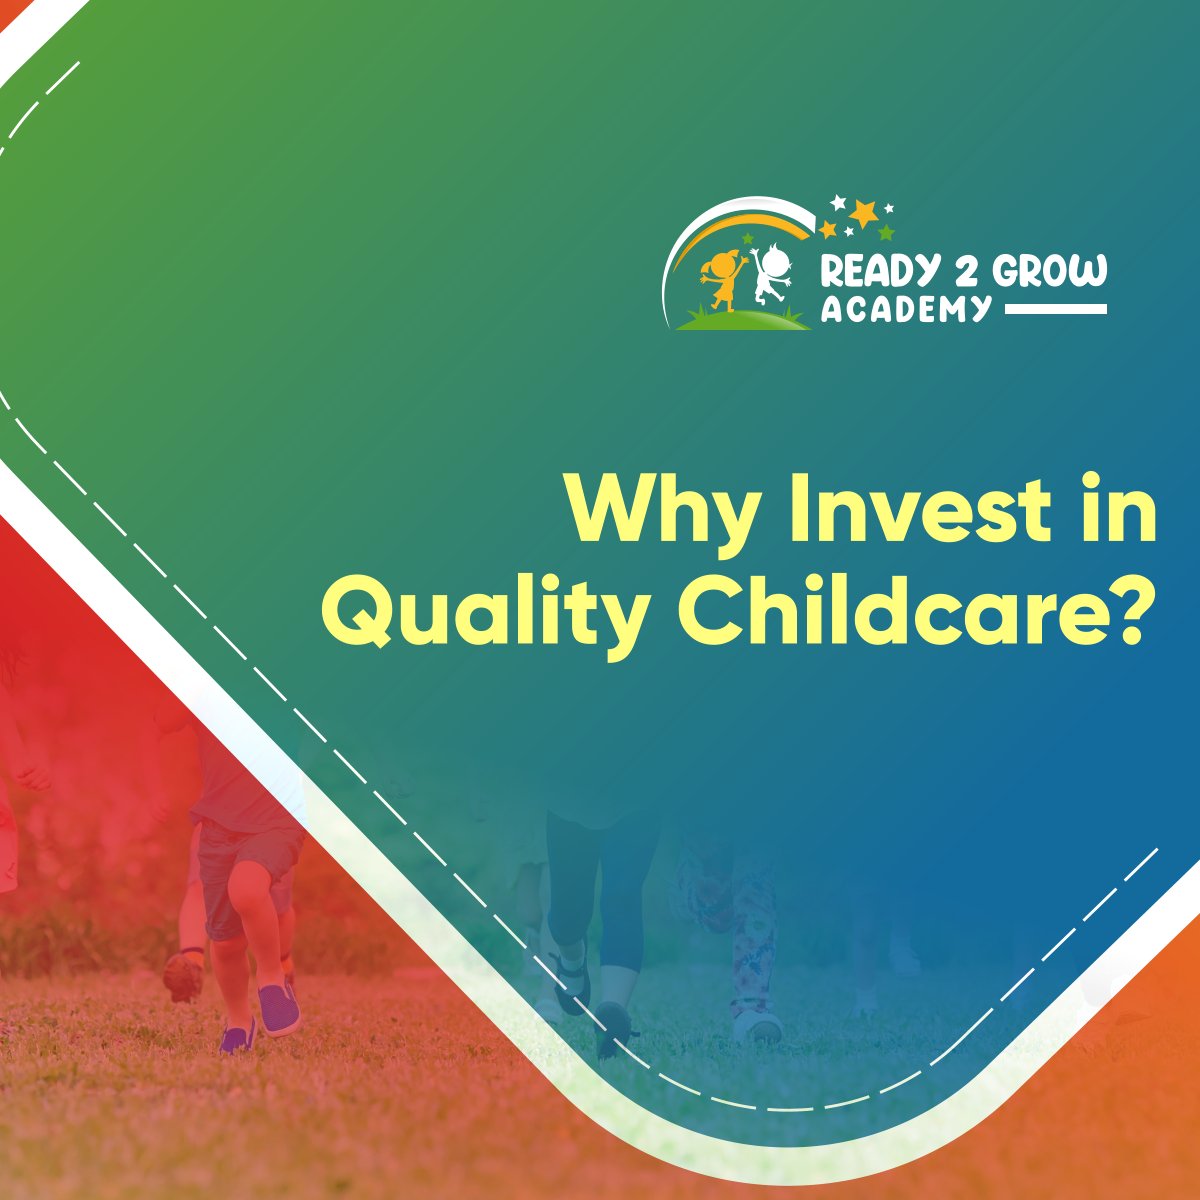 Investing in high-quality care during a child's early years can affect their long-term well-being and success, not only during childhood but also into adulthood. Providing children with a nurturing environment will lead to improved outcomes.

#Childcare #QualityChildcare